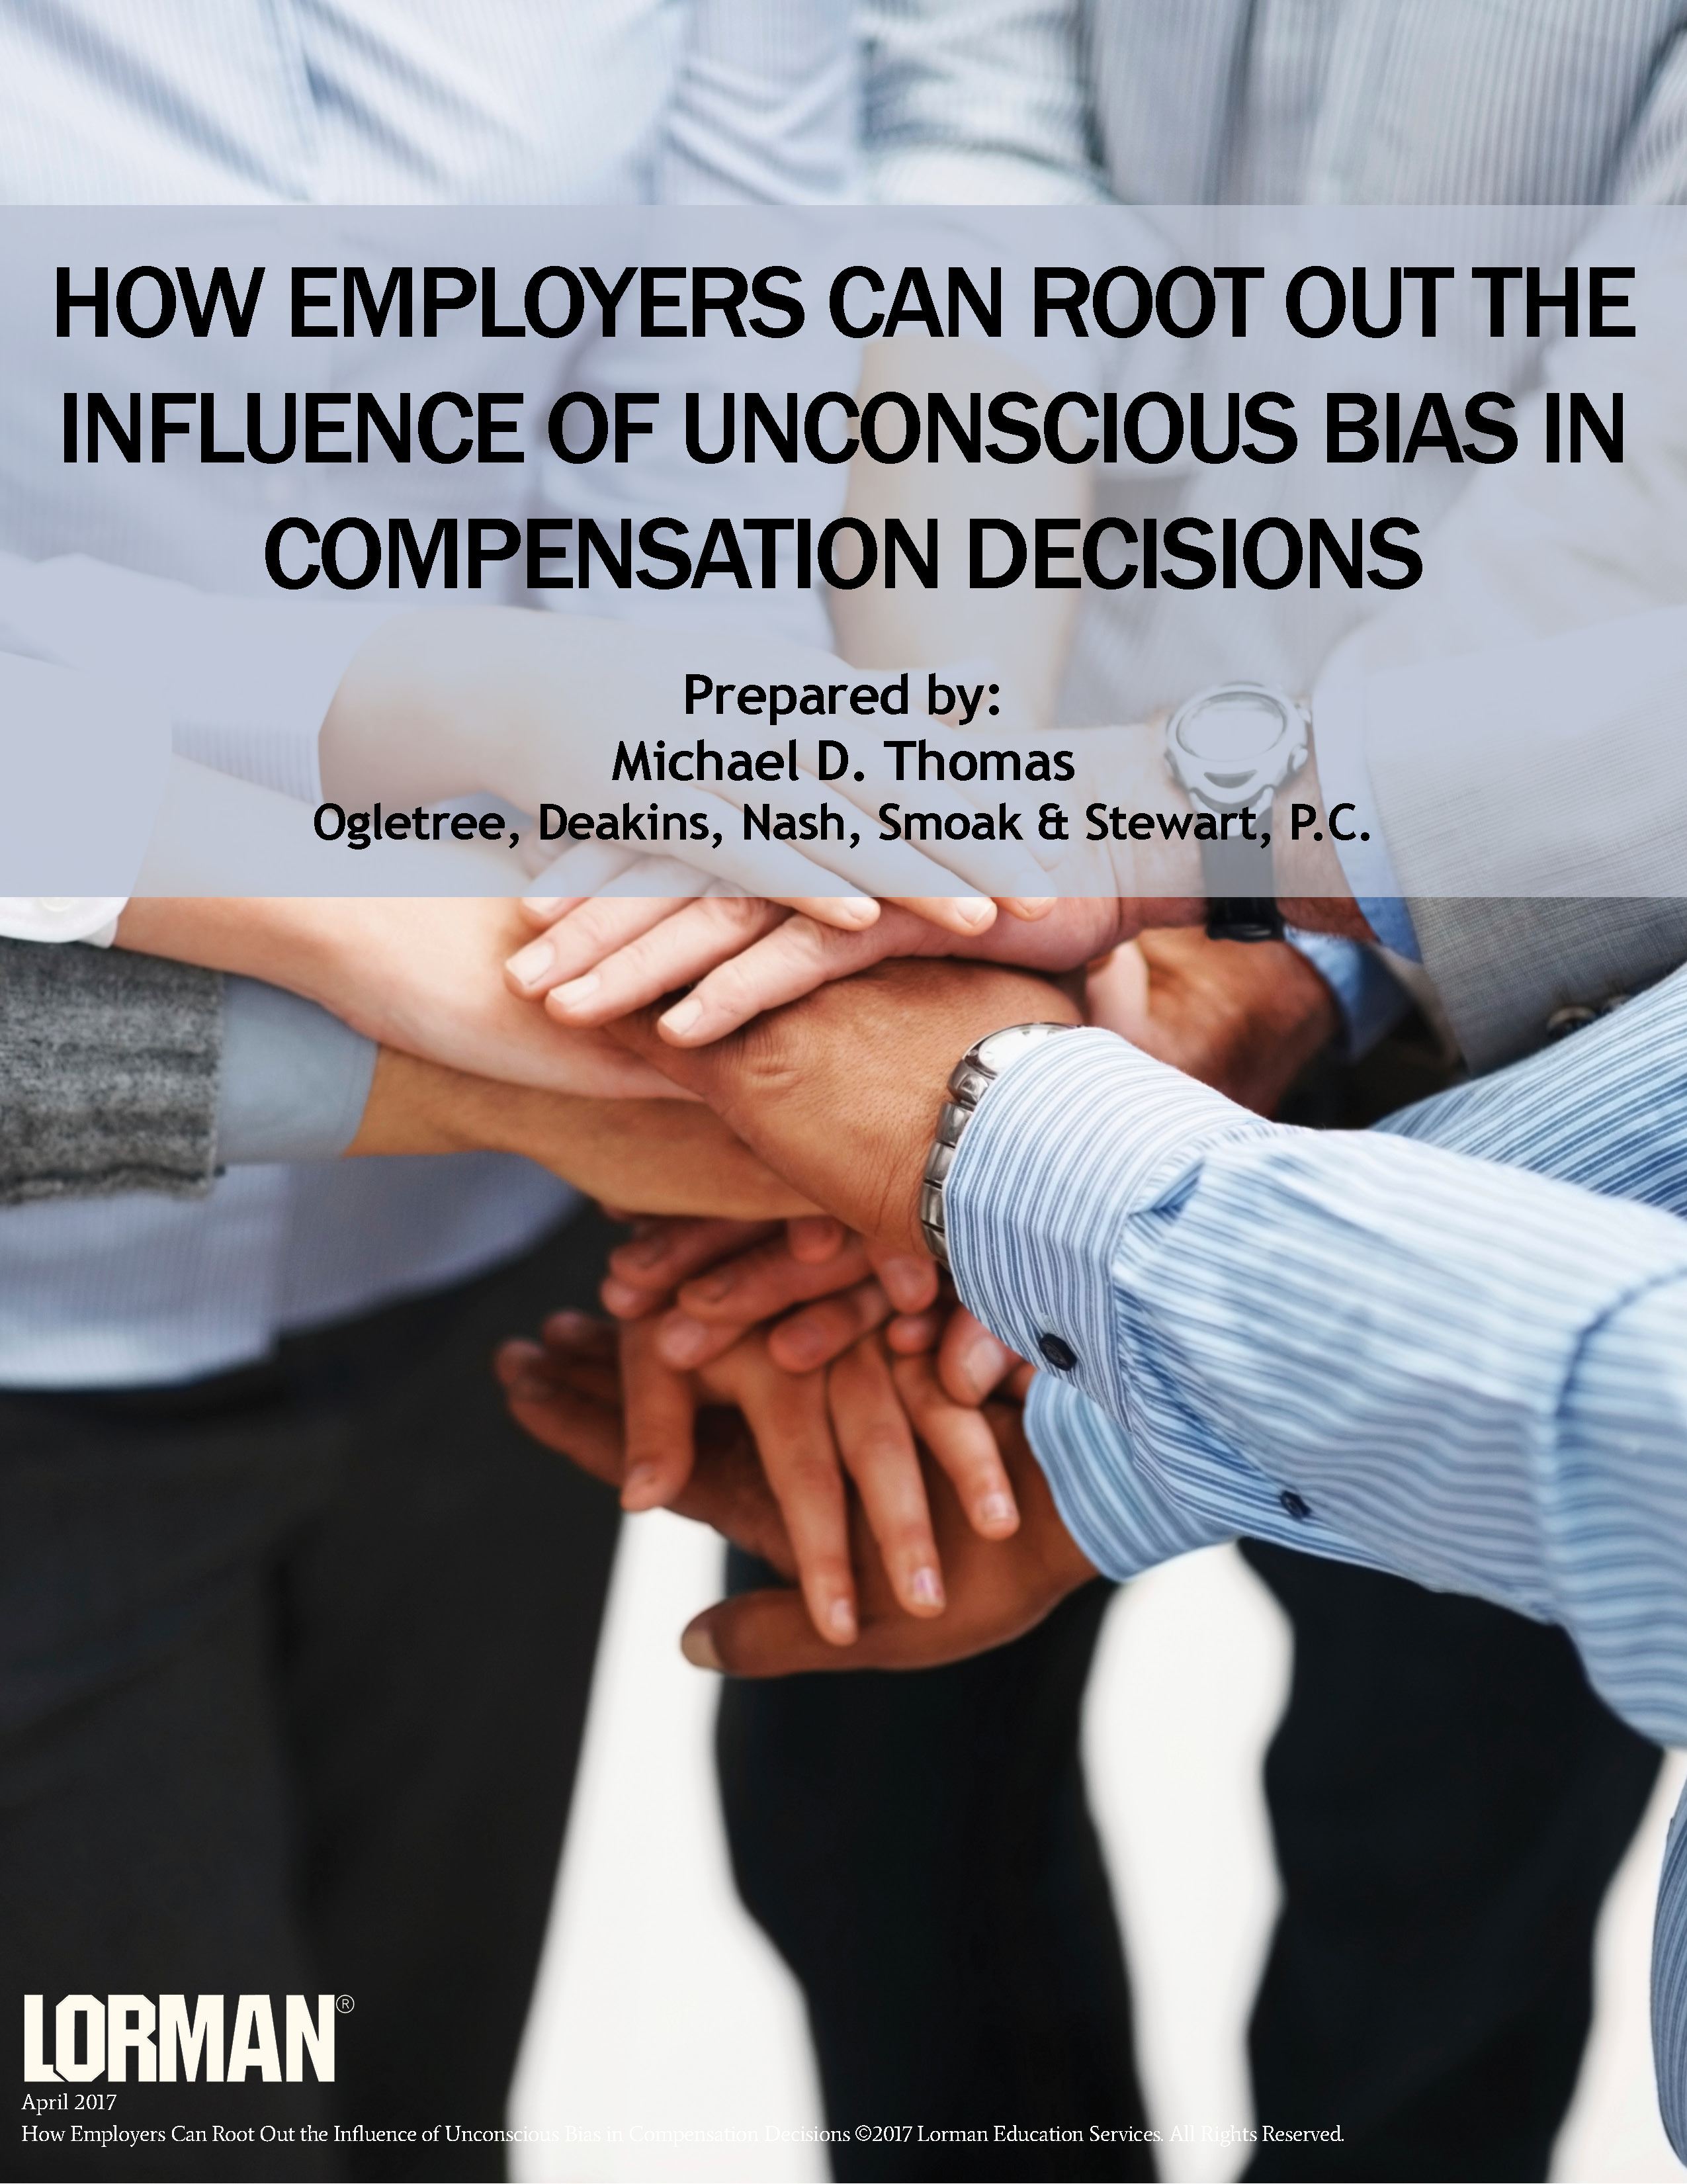 How Employers Can Root Out the Influence of Unconscious Bias in Compensation Decisions